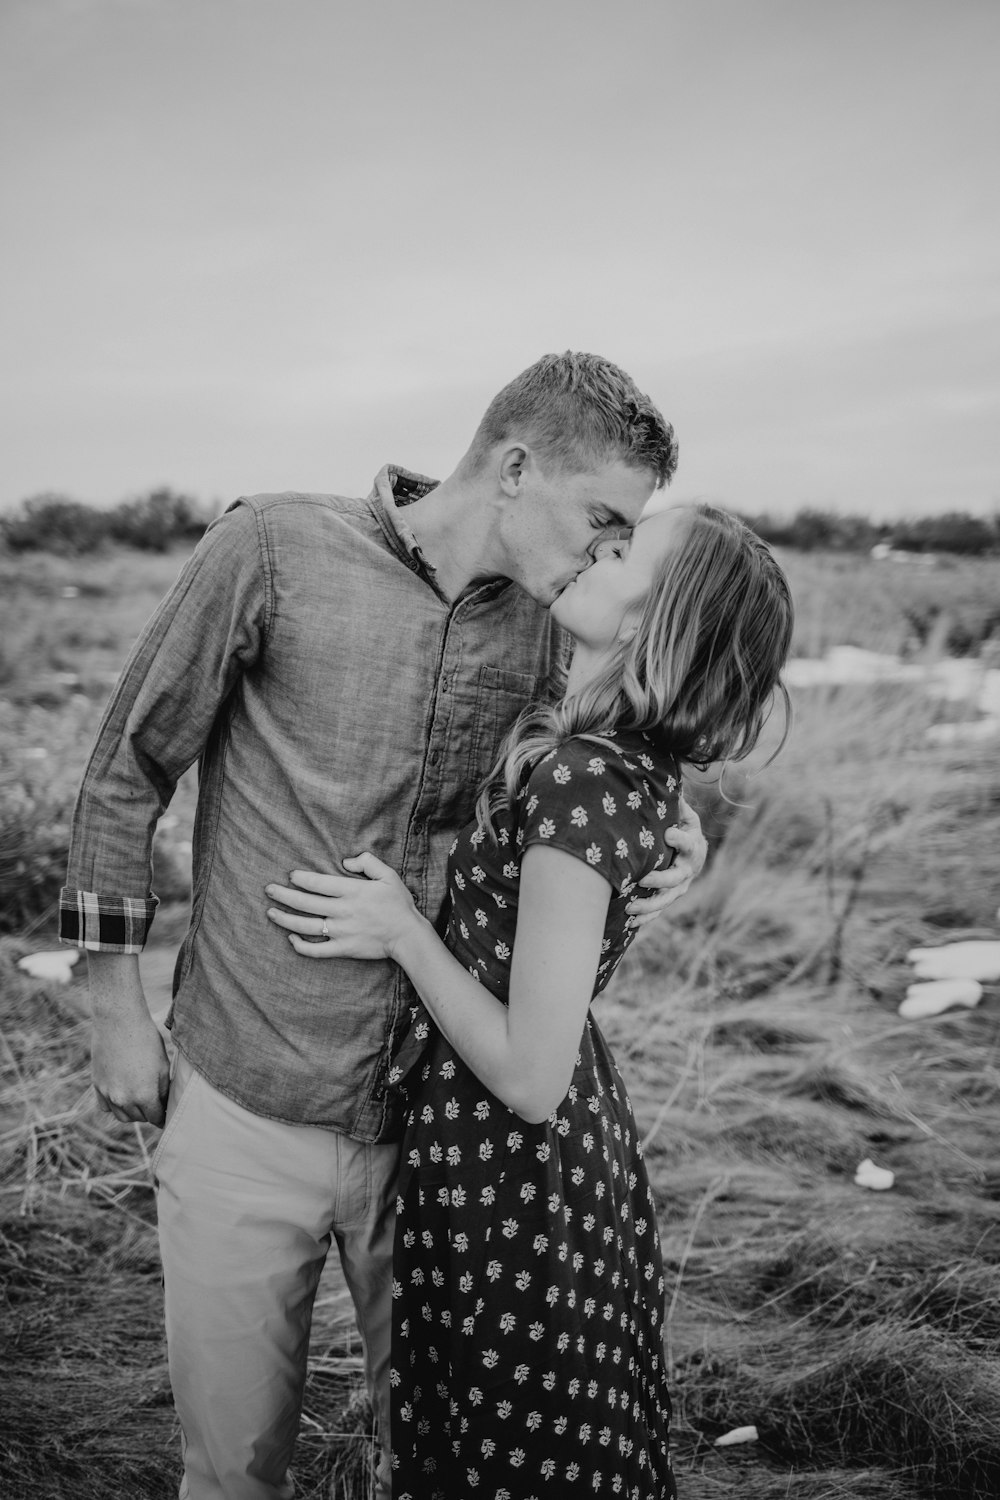 grayscale photography of man and woman standing while kissing on lips